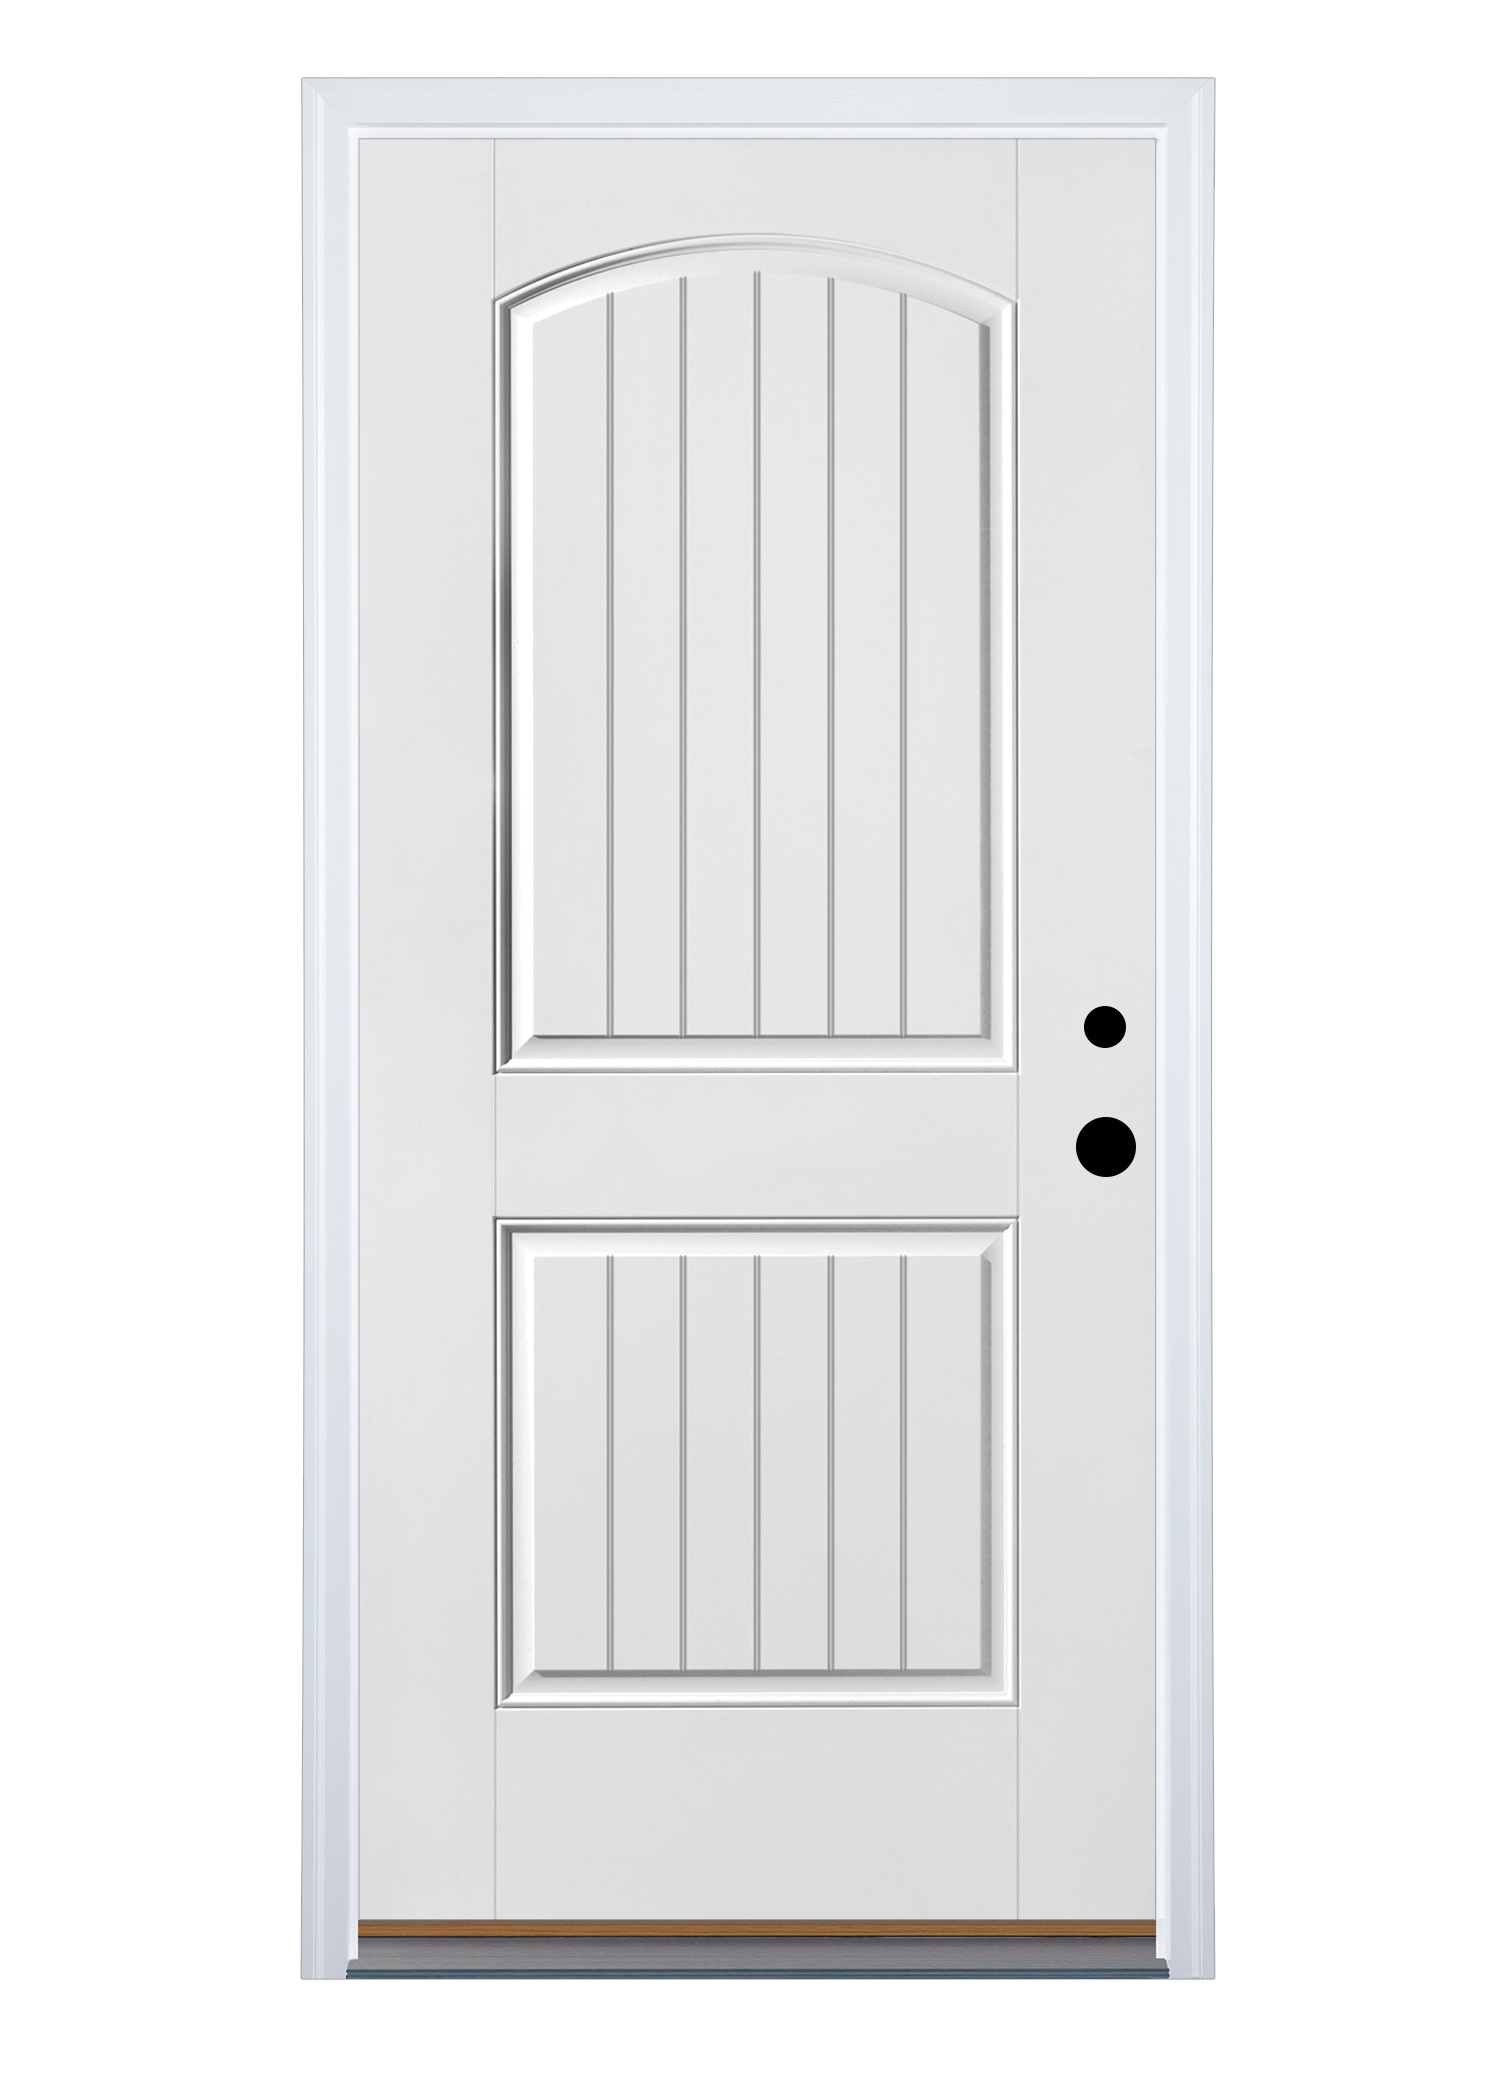 Therma-Tru Benchmark Doors 36-in x 80-in Fiberglass Left-Hand Inswing Ready To Paint Prehung Single Front Door with Brickmould Insulating Core in -  BMTTE611889